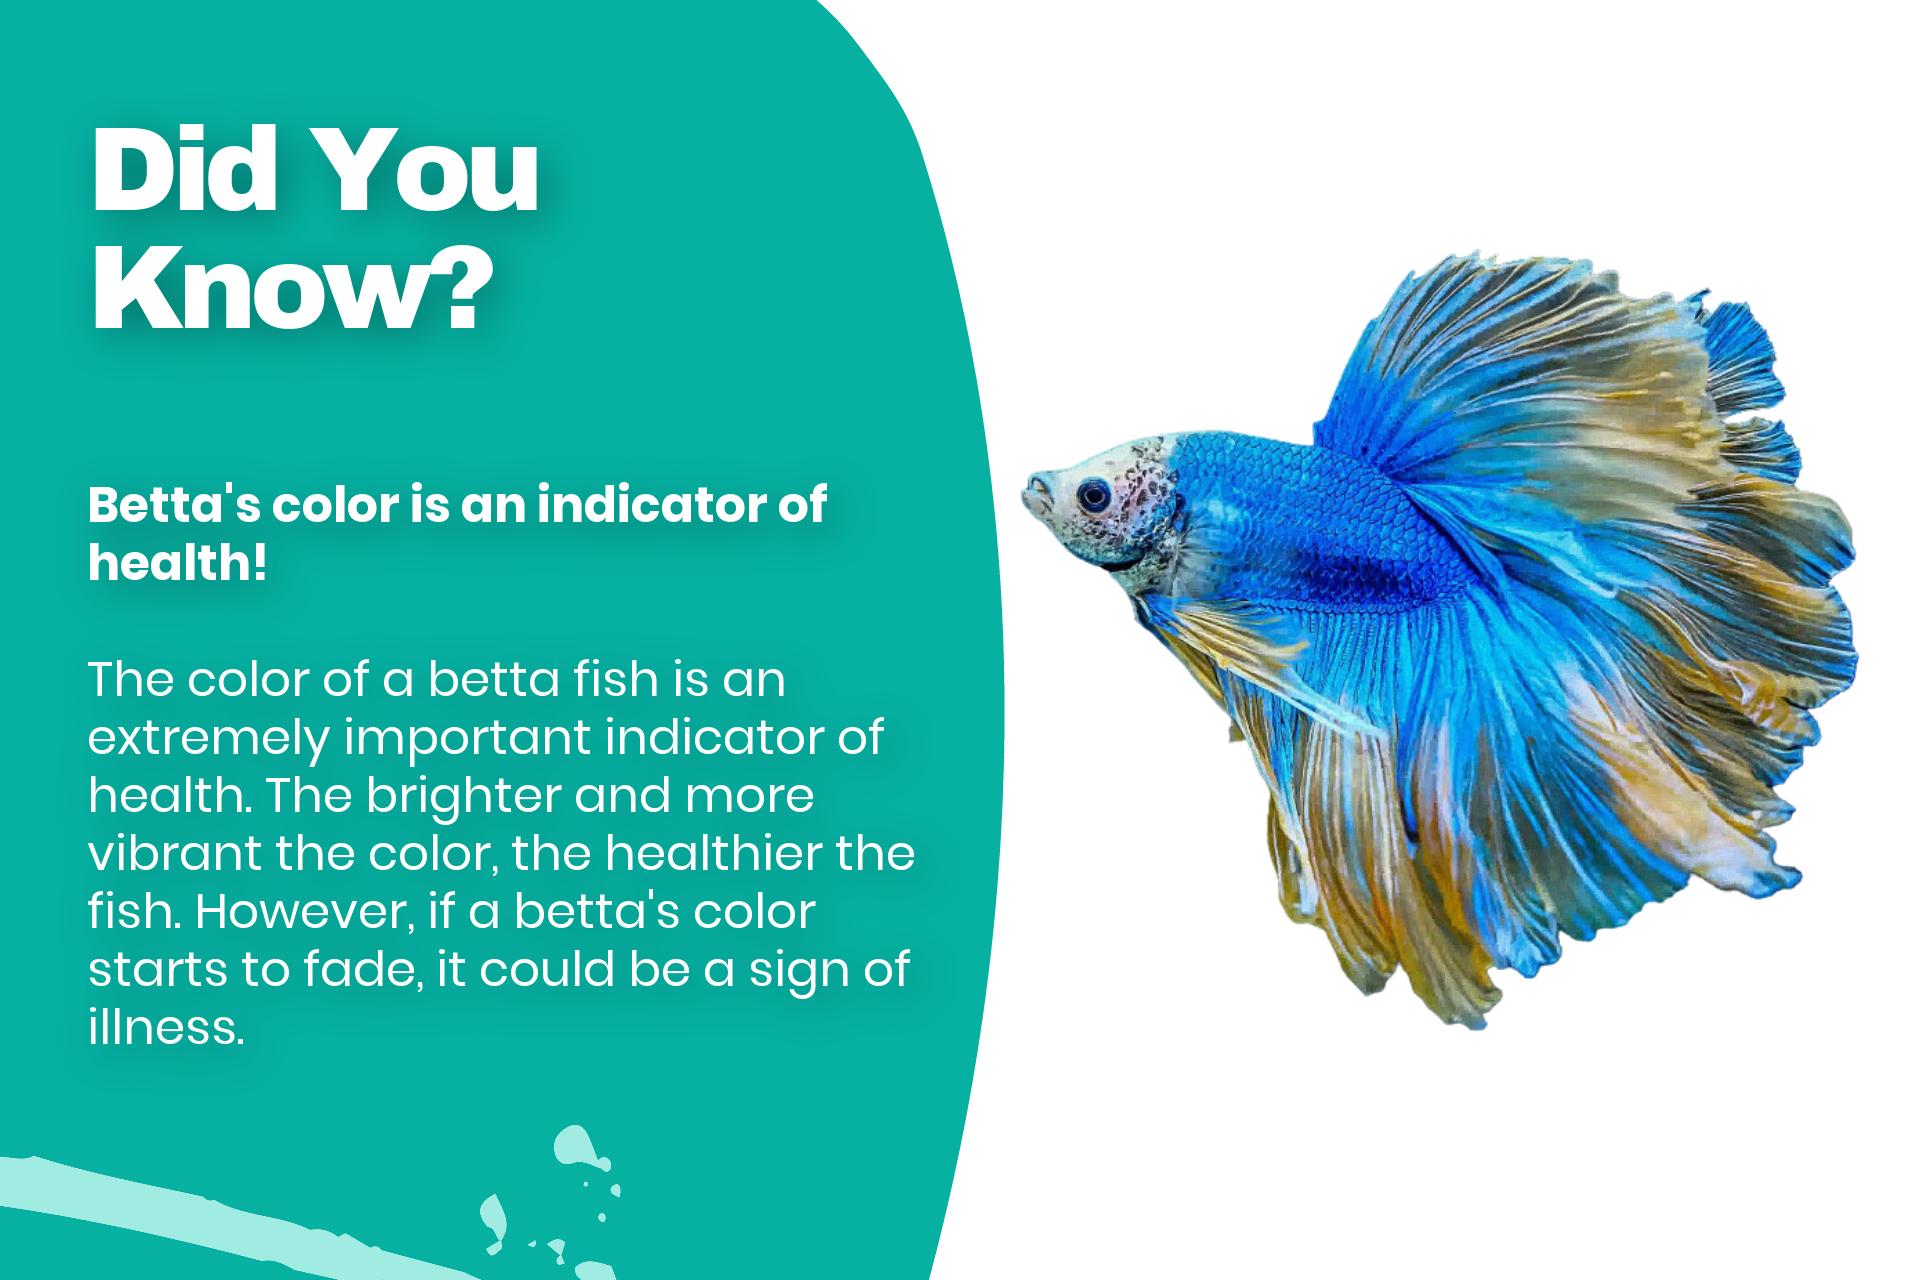 Betta's color is an indicator of health